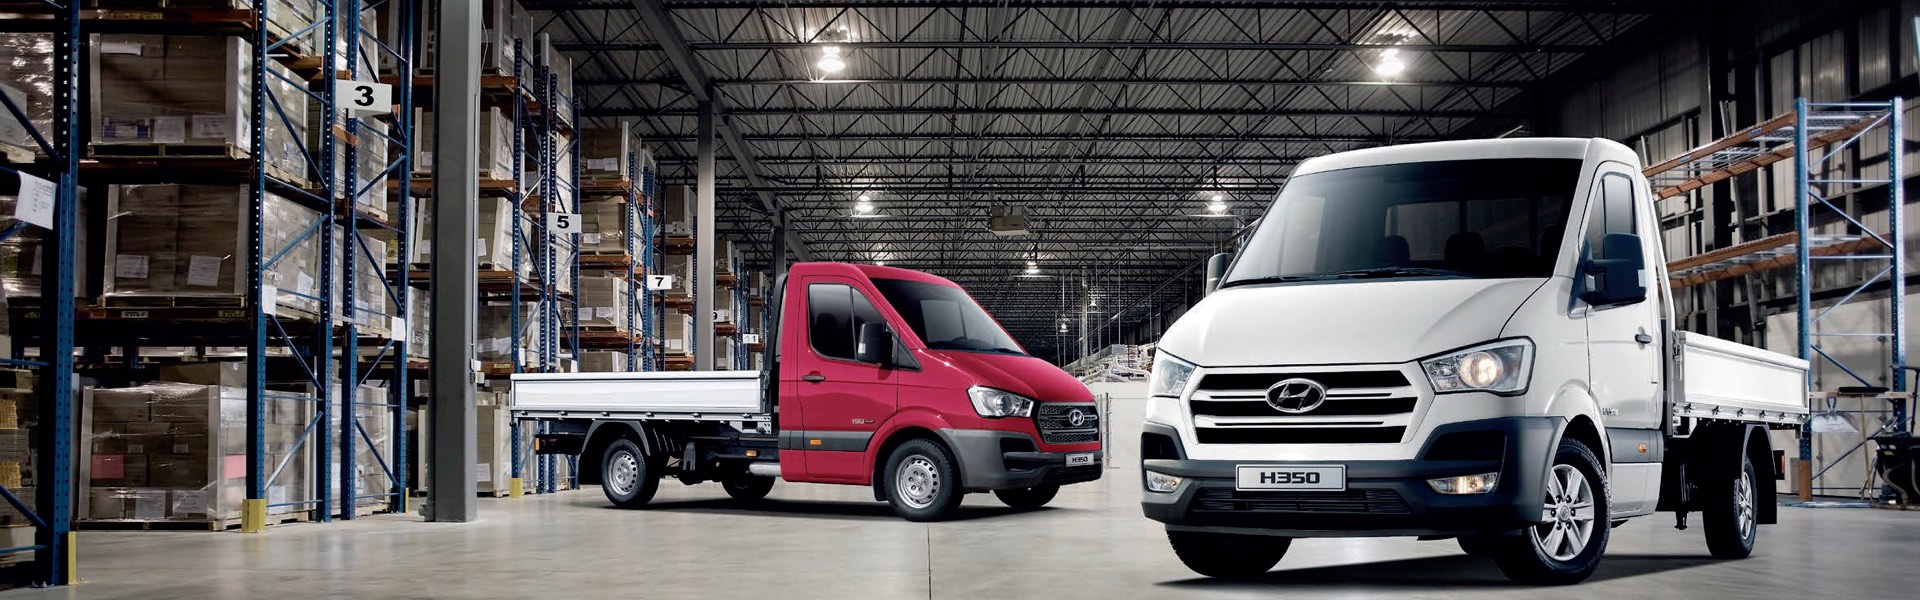 Chassis Cab Provides Solid Foundation for Customization